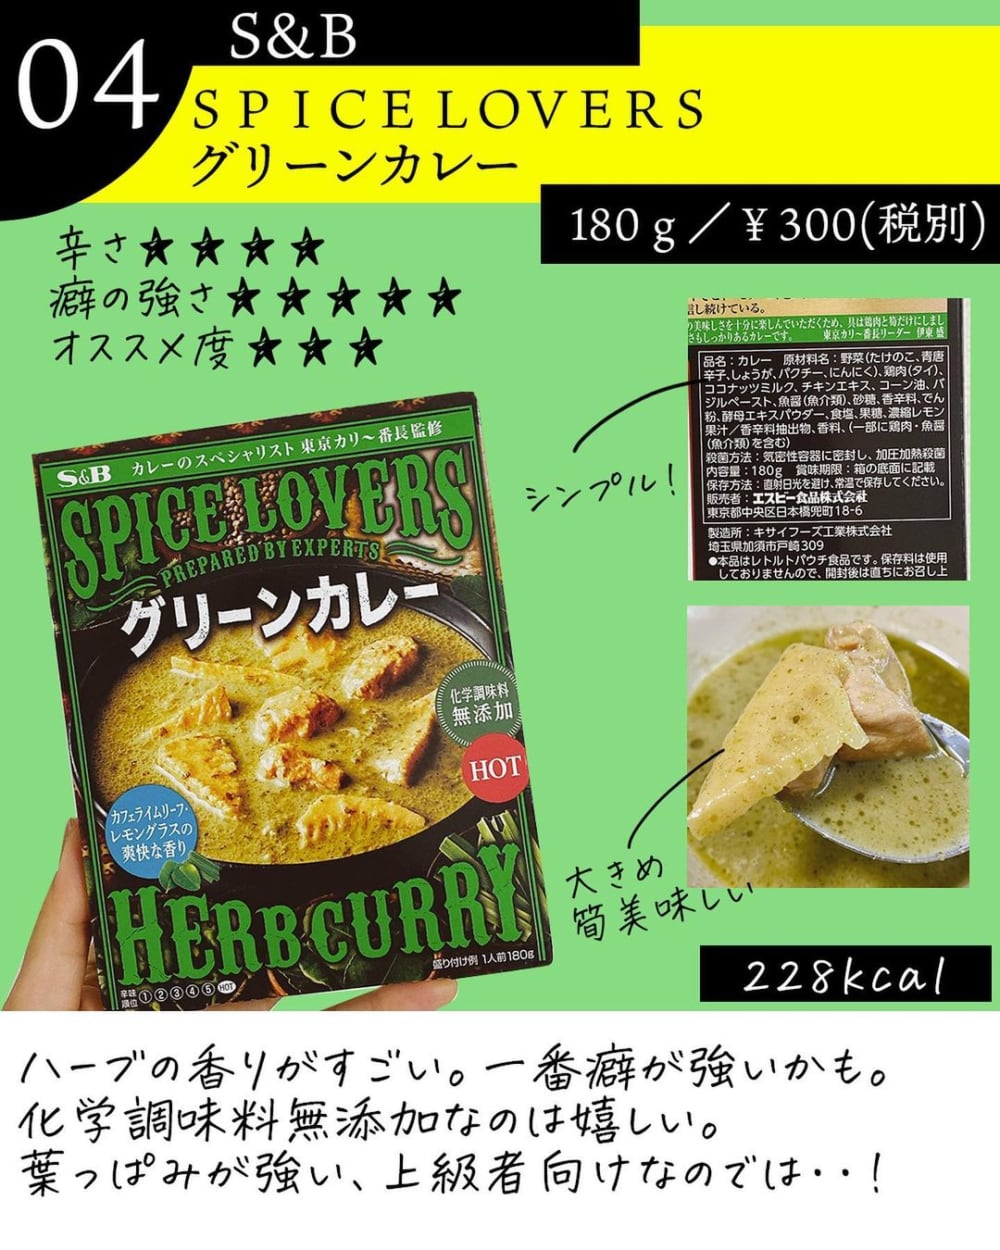 SPICELOVERSグリーンカレー